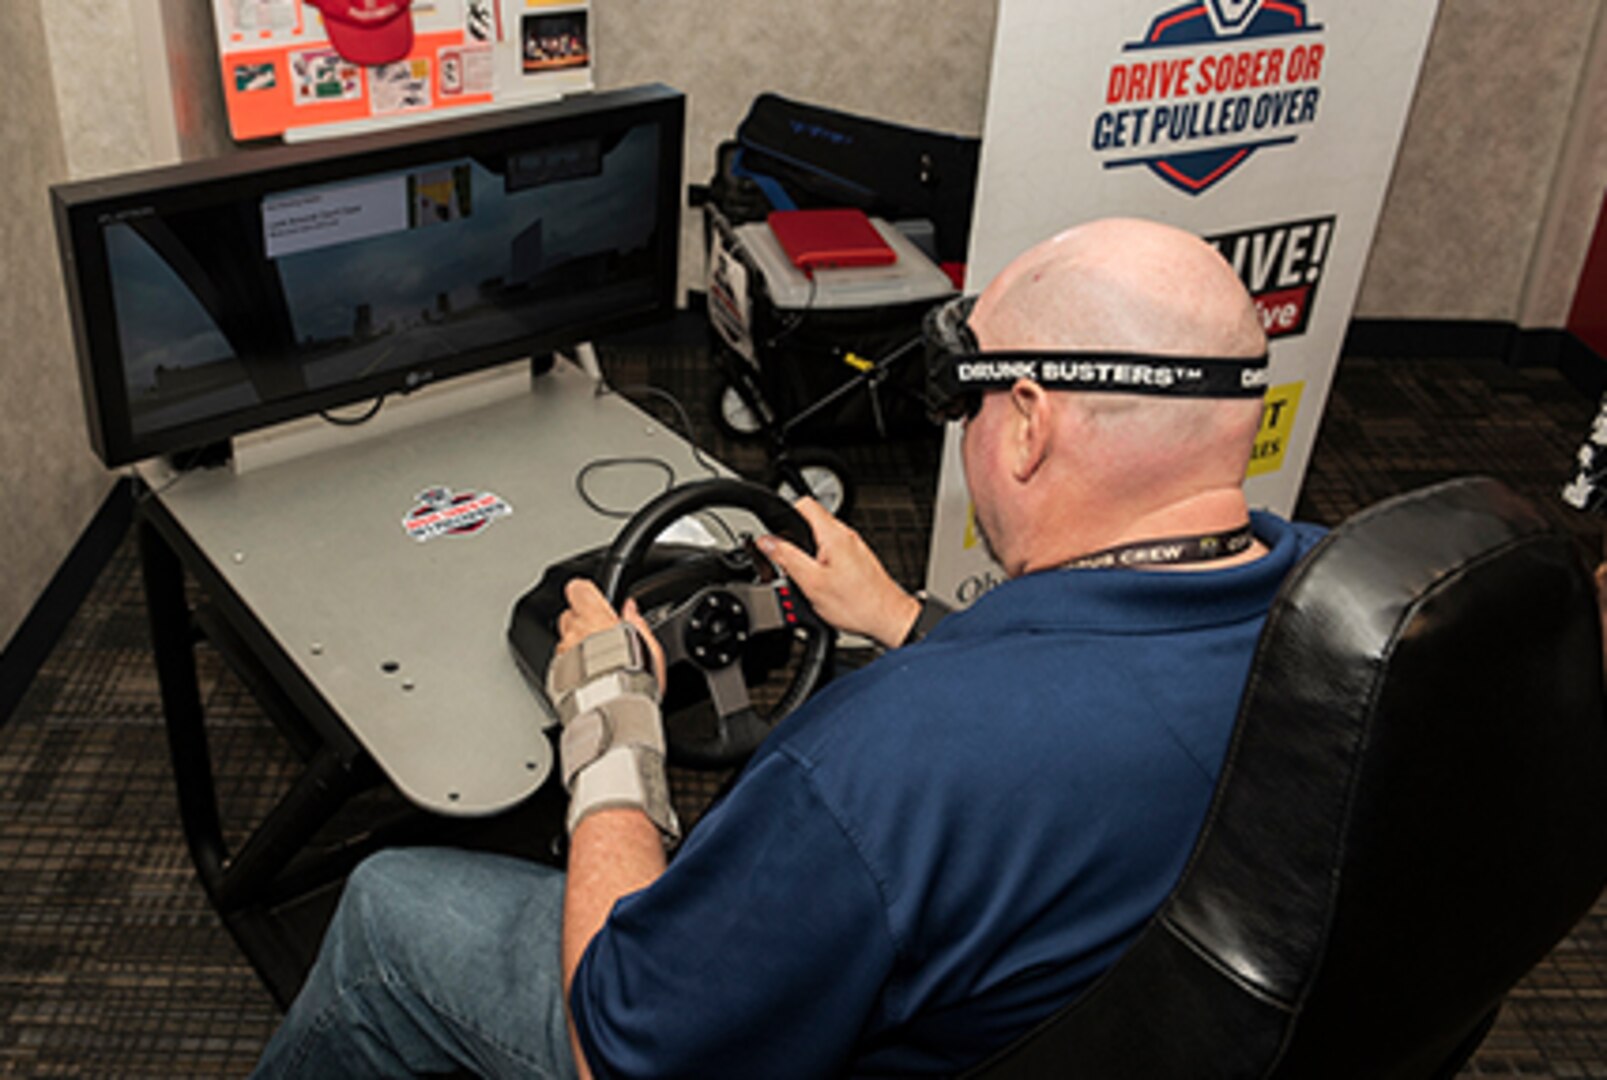 Land and Maritime associate tests out an impairment simulator